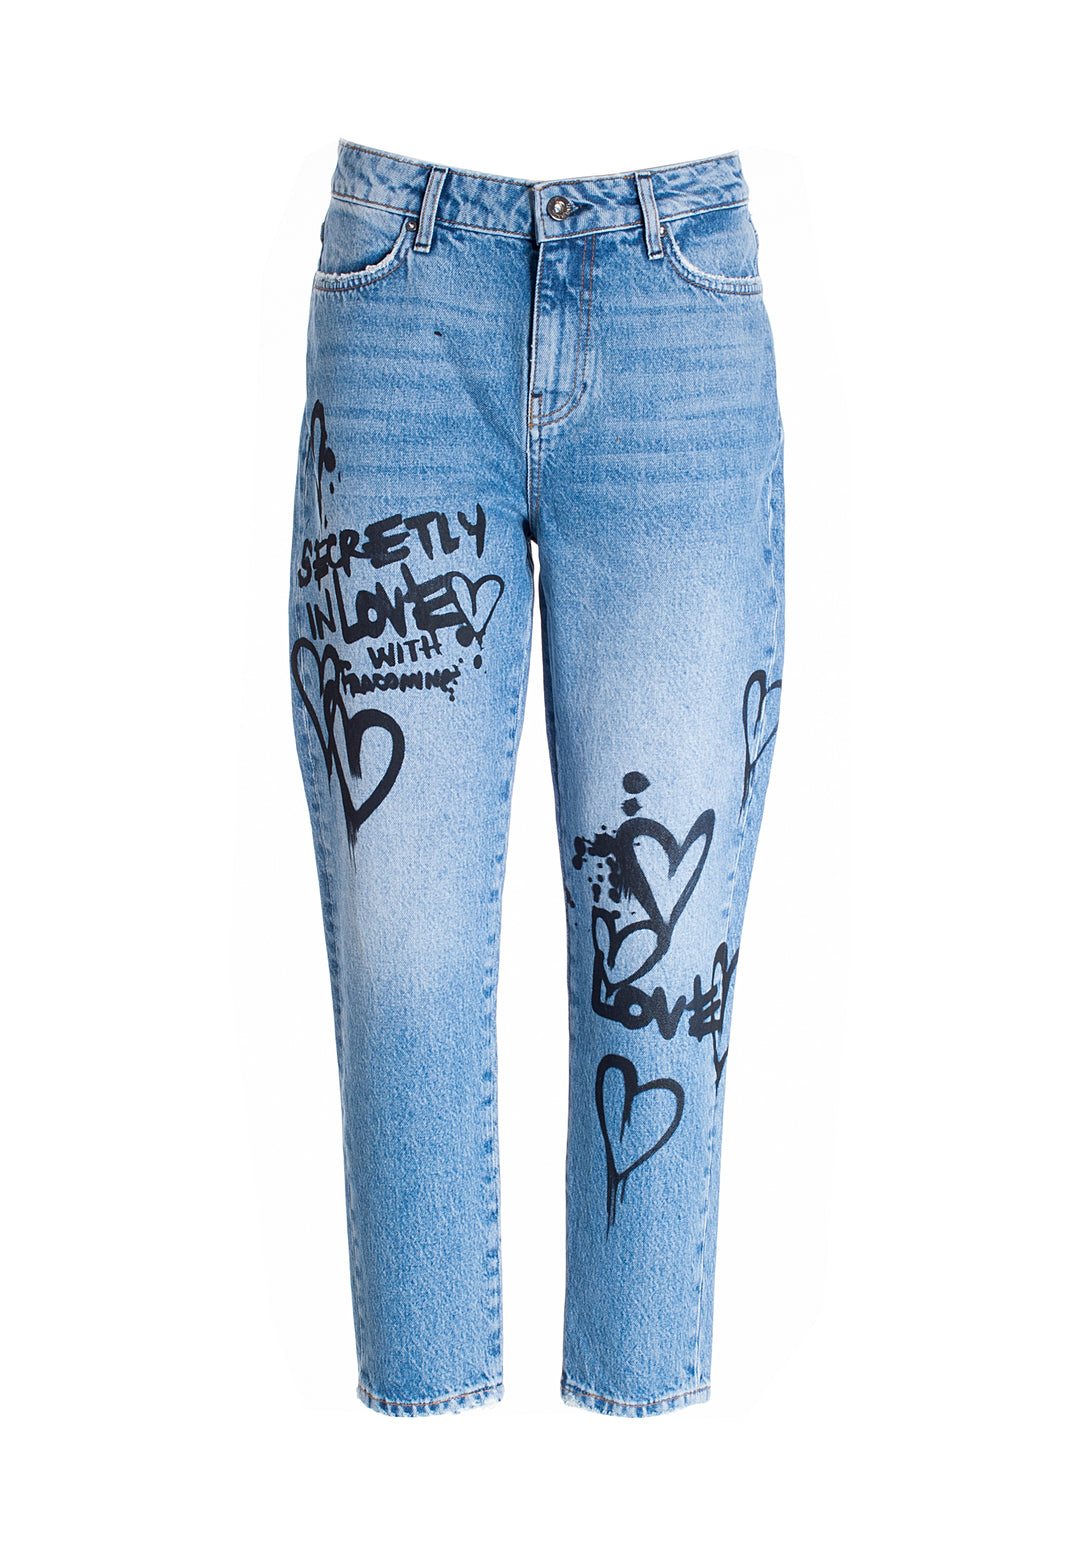 Jeans loose fit cropped made in denim with light wash